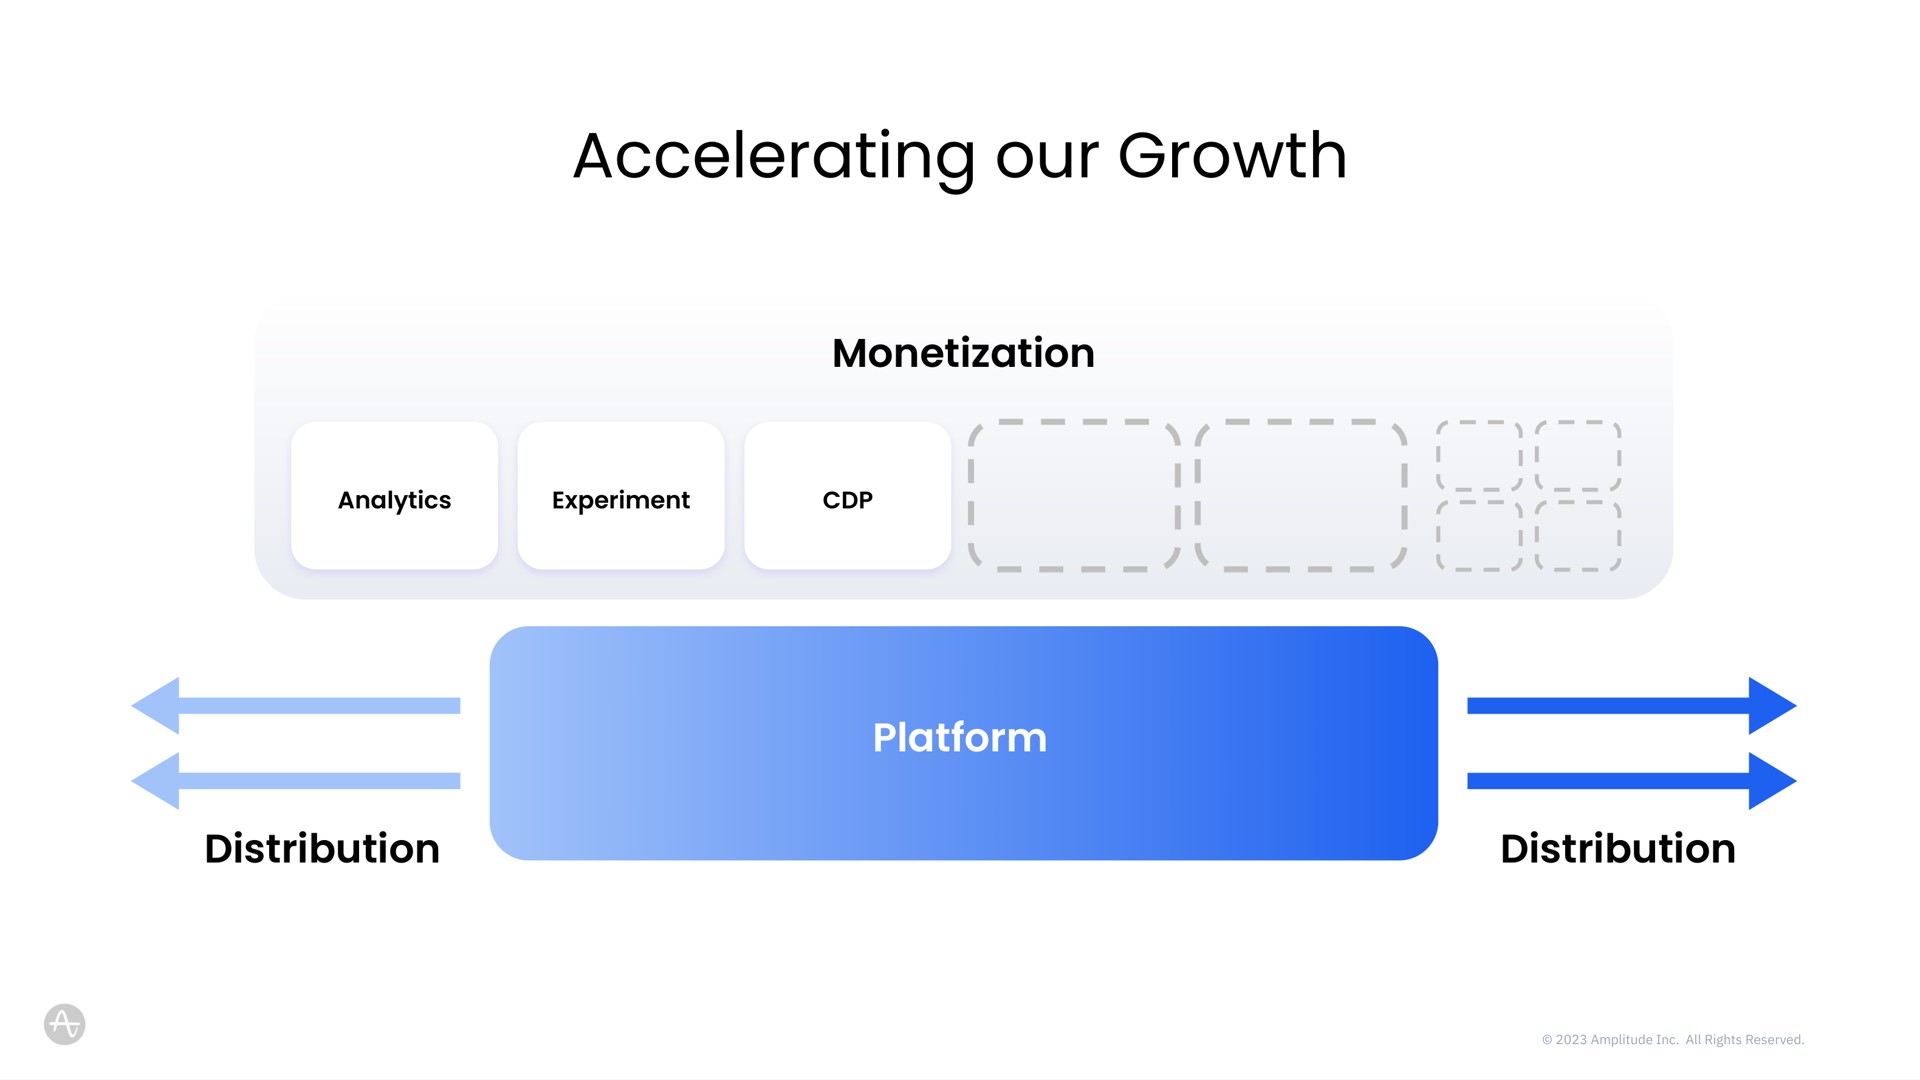 personalization accelerating our growth monetization distribution distribution platform distribution monetization analytics platform data | Amplitude